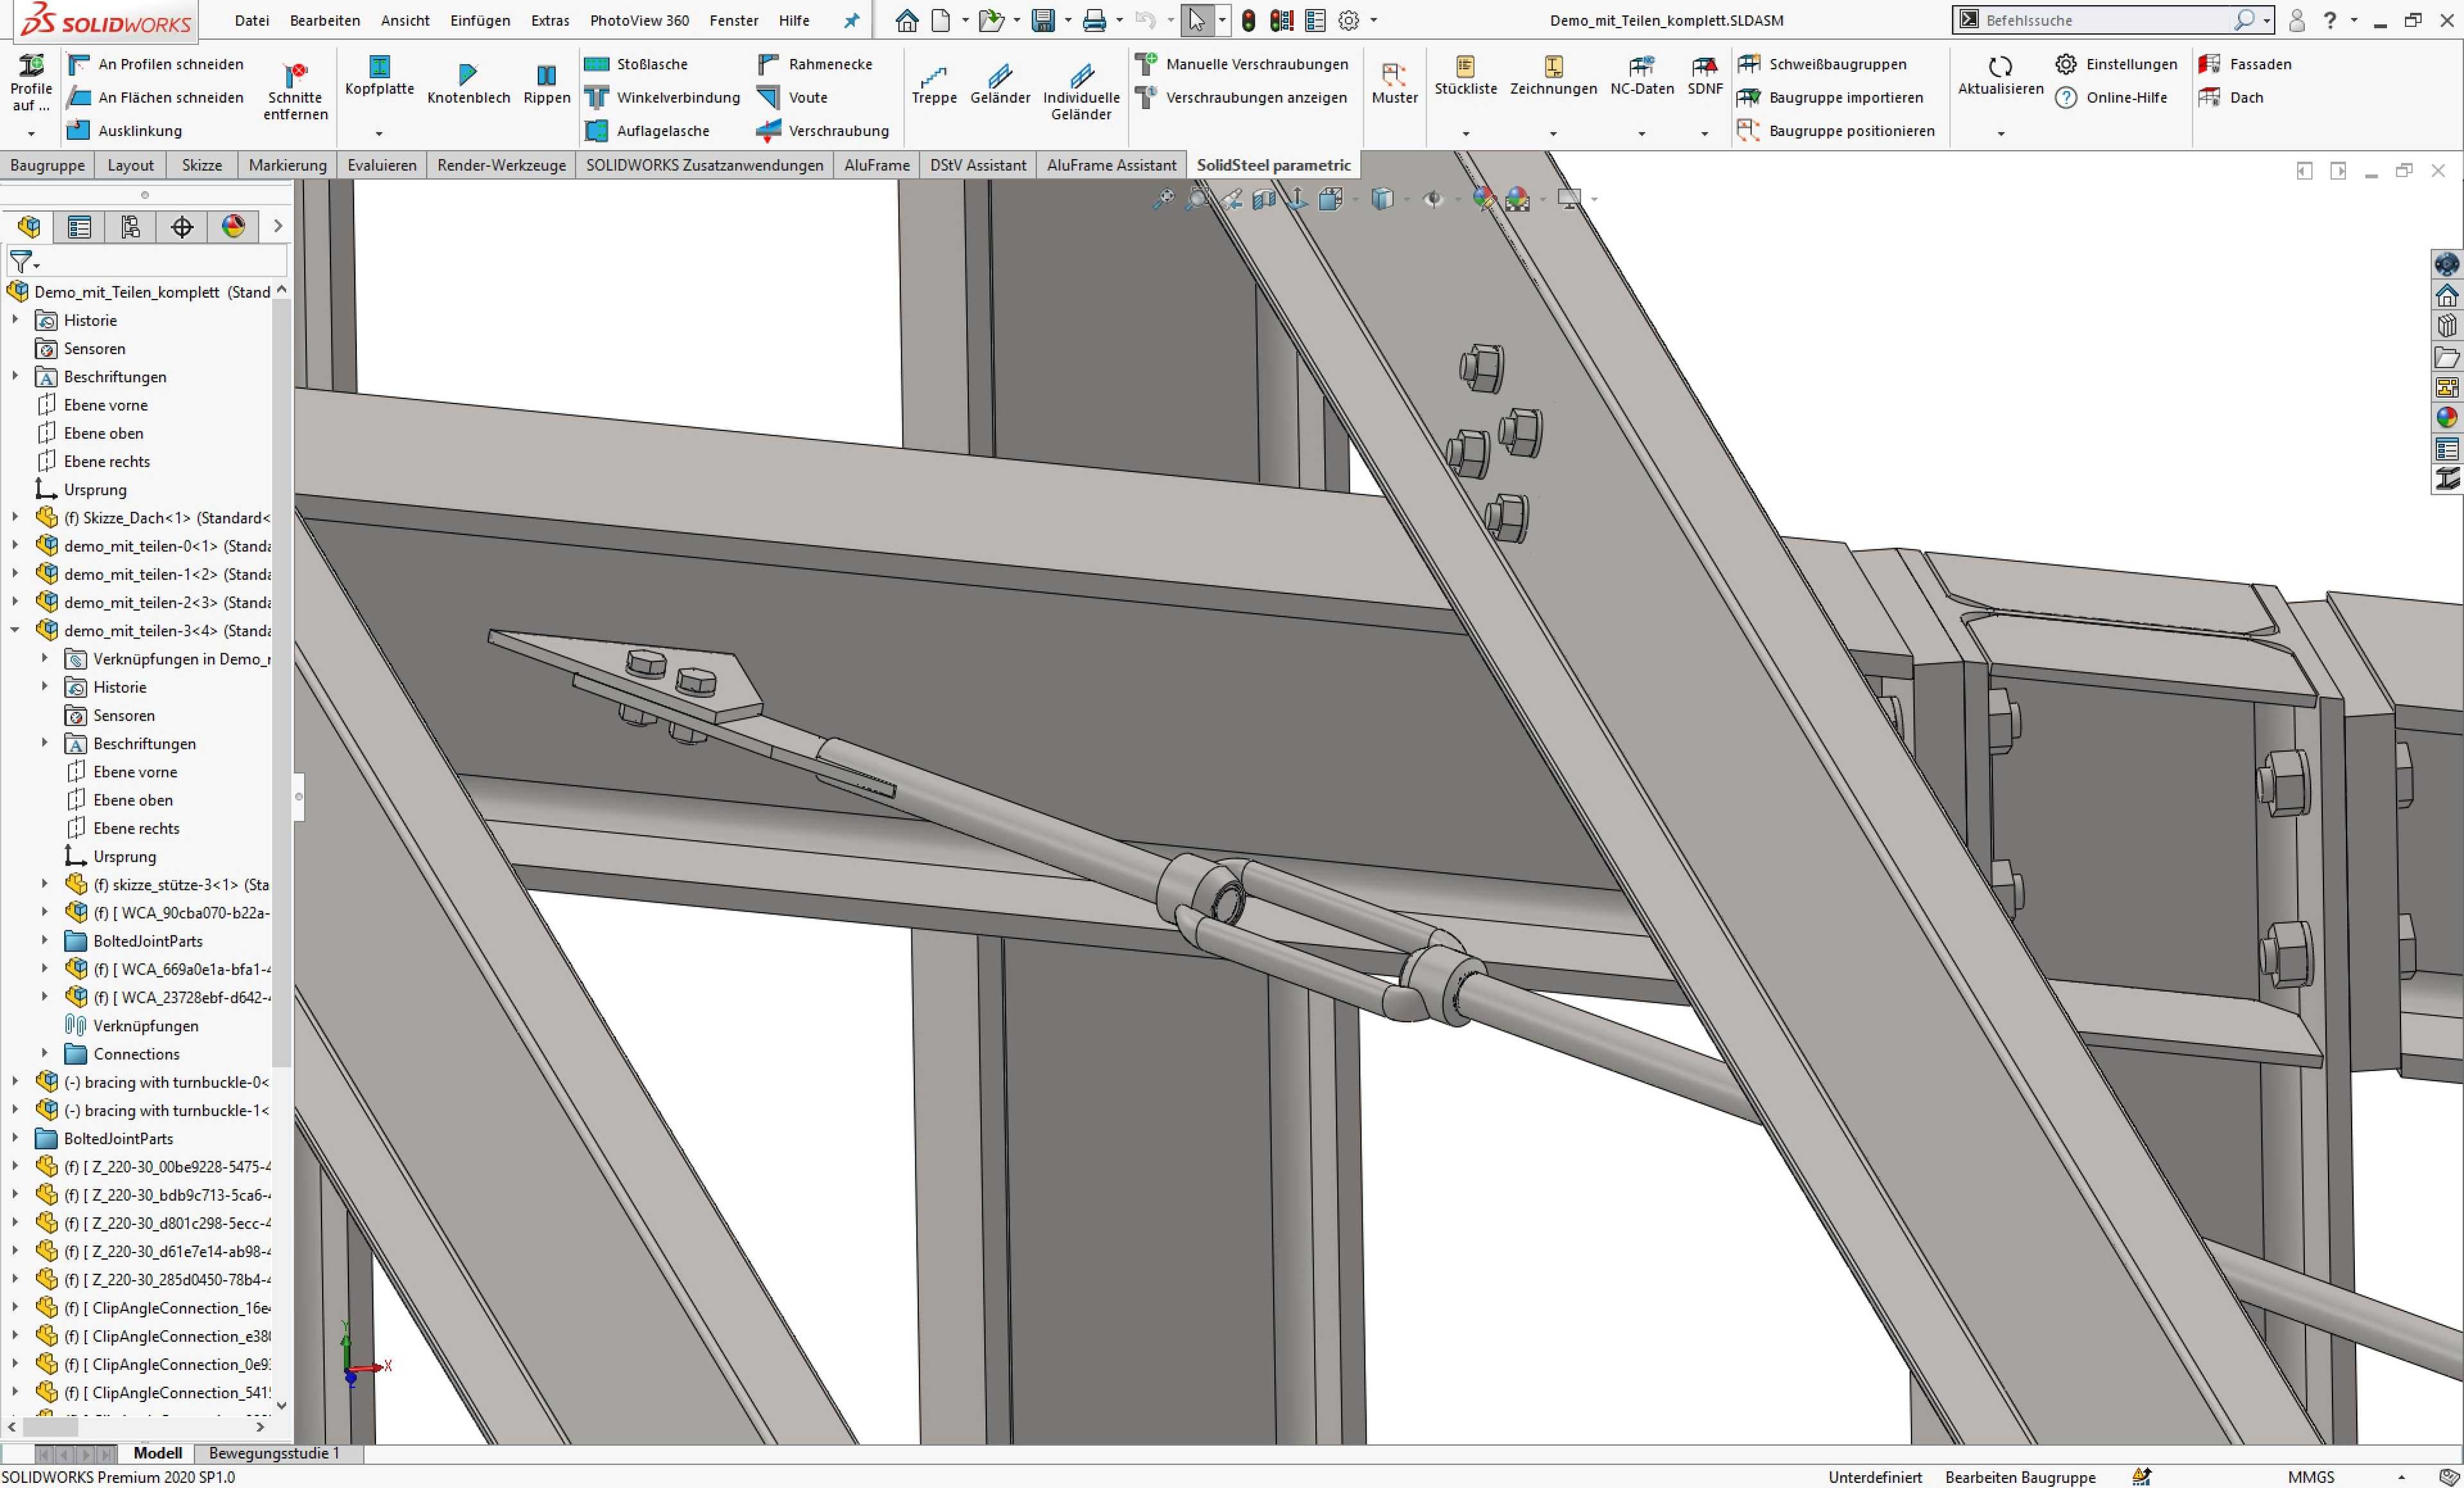 SolidSteel Parametric for SOLIDWORKS